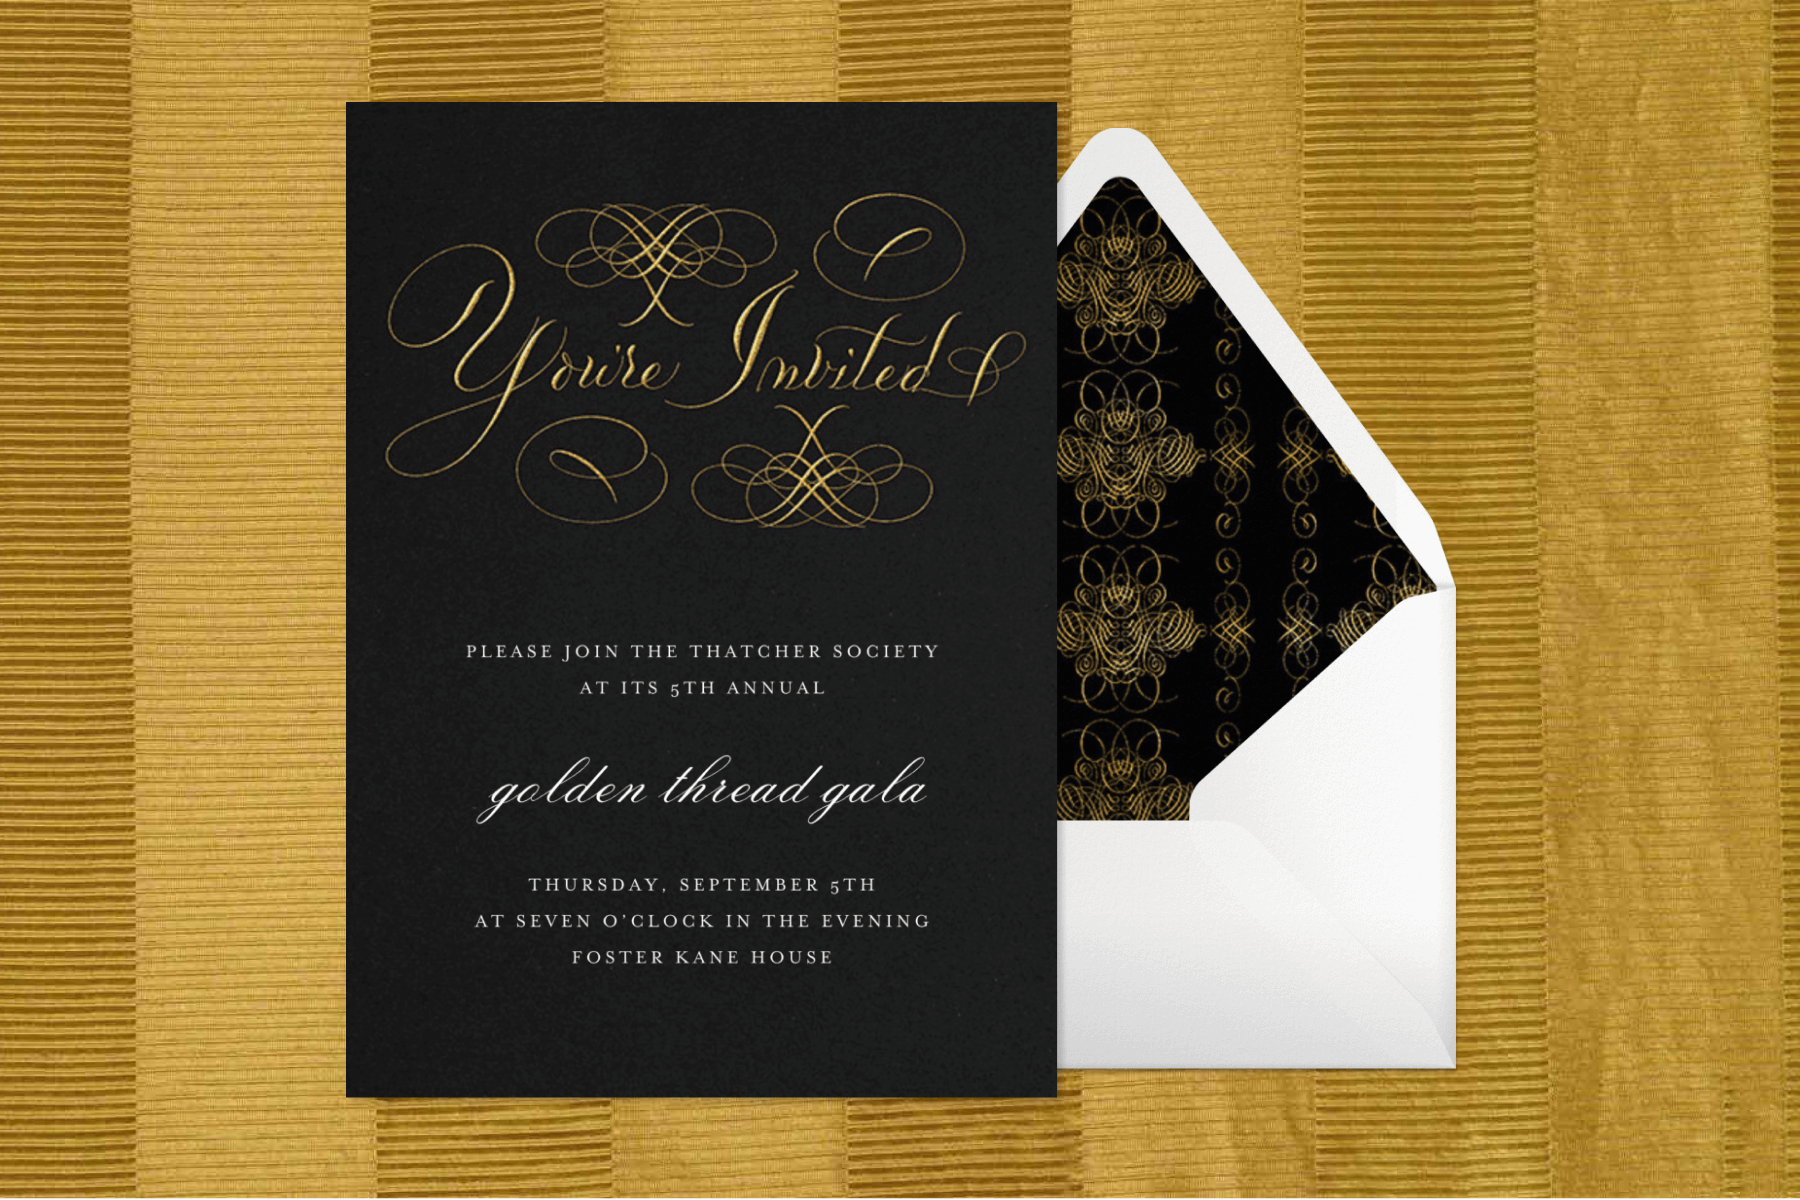 A black “Golden Threat Gala” invitation with ornate gold calligraphy spelling “You’re Invited” at the top beside an envelope with matching liner.